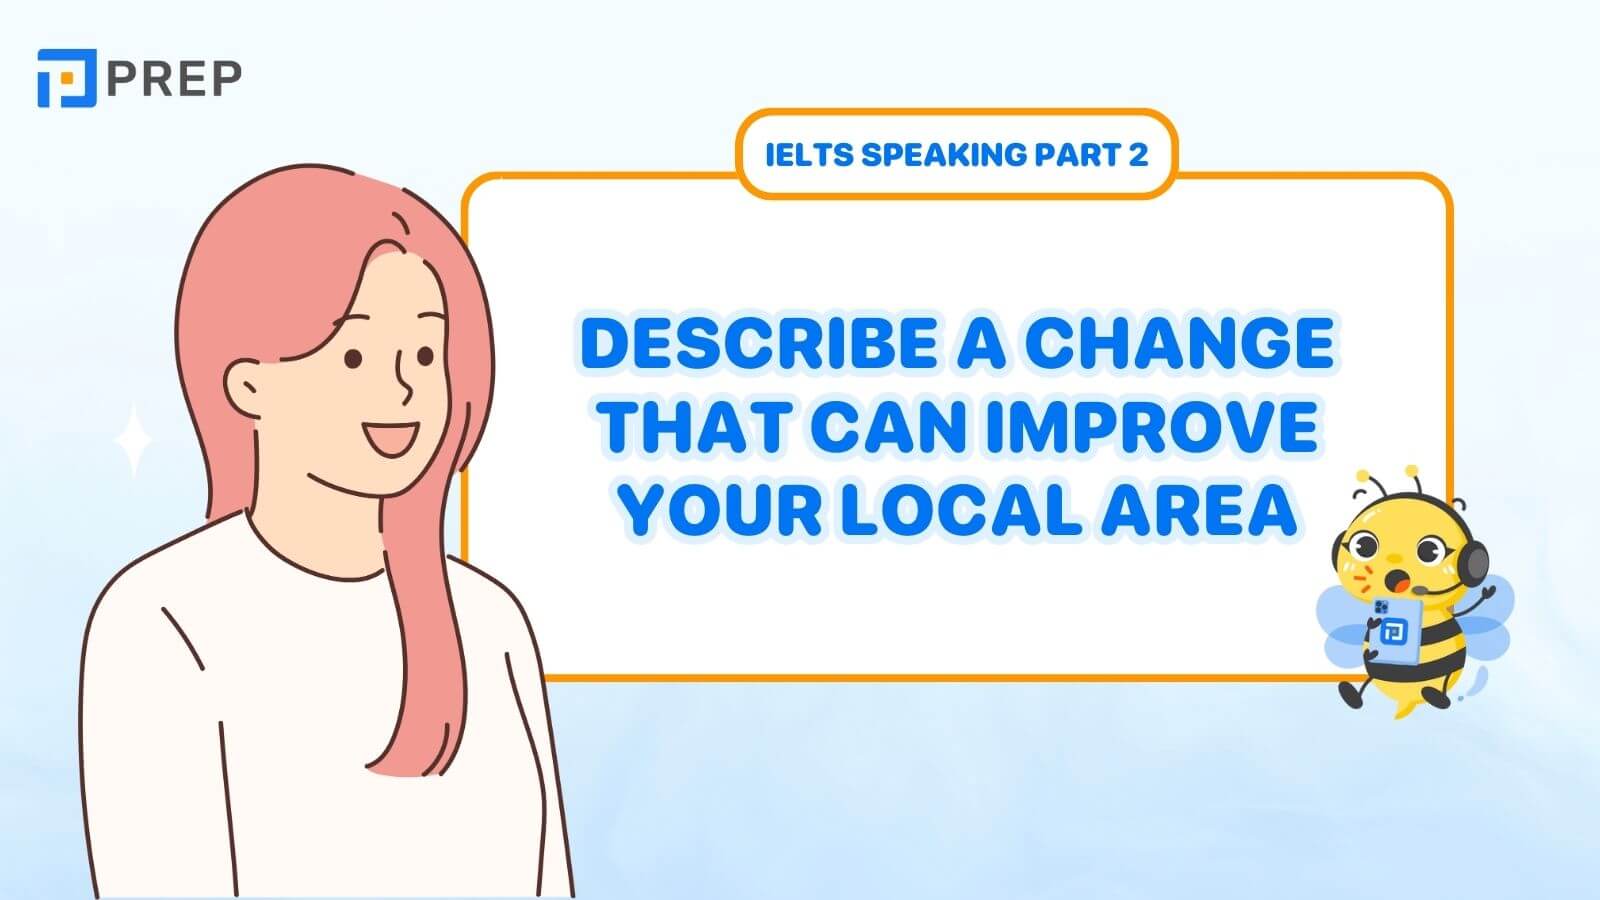 Describe a change that can improve your local area